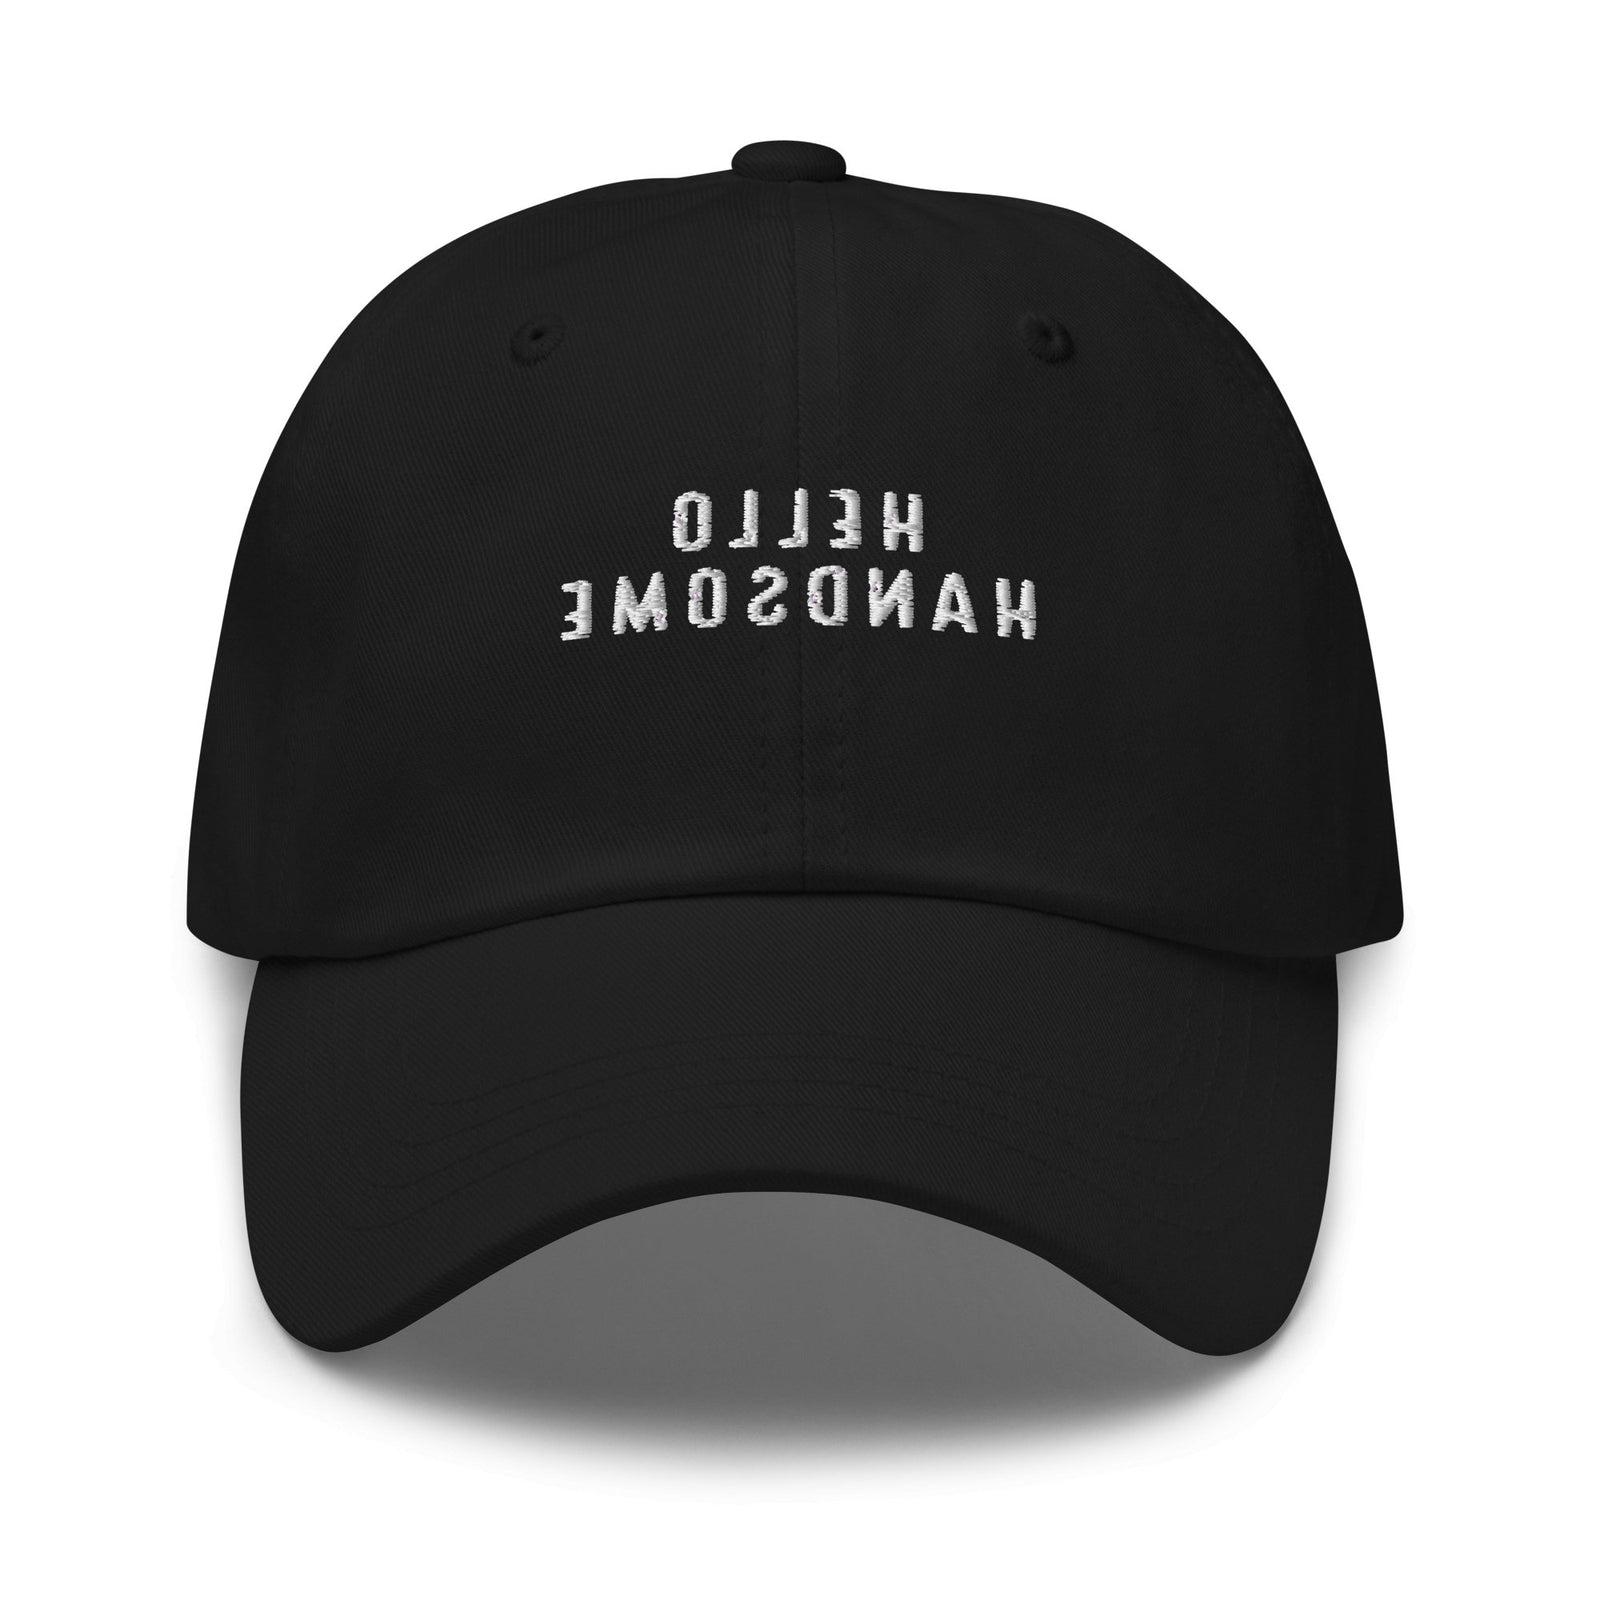 //cdn.shopify.com/s/files/1/0274/2488/2766/products/hello-handsome-dad-hat-430849_5000x.jpg?v=1652422198 5000w,
    //cdn.shopify.com/s/files/1/0274/2488/2766/products/hello-handsome-dad-hat-430849_4500x.jpg?v=1652422198 4500w,
    //cdn.shopify.com/s/files/1/0274/2488/2766/products/hello-handsome-dad-hat-430849_4000x.jpg?v=1652422198 4000w,
    //cdn.shopify.com/s/files/1/0274/2488/2766/products/hello-handsome-dad-hat-430849_3500x.jpg?v=1652422198 3500w,
    //cdn.shopify.com/s/files/1/0274/2488/2766/products/hello-handsome-dad-hat-430849_3000x.jpg?v=1652422198 3000w,
    //cdn.shopify.com/s/files/1/0274/2488/2766/products/hello-handsome-dad-hat-430849_2500x.jpg?v=1652422198 2500w,
    //cdn.shopify.com/s/files/1/0274/2488/2766/products/hello-handsome-dad-hat-430849_2000x.jpg?v=1652422198 2000w,
    //cdn.shopify.com/s/files/1/0274/2488/2766/products/hello-handsome-dad-hat-430849_1800x.jpg?v=1652422198 1800w,
    //cdn.shopify.com/s/files/1/0274/2488/2766/products/hello-handsome-dad-hat-430849_1600x.jpg?v=1652422198 1600w,
    //cdn.shopify.com/s/files/1/0274/2488/2766/products/hello-handsome-dad-hat-430849_1400x.jpg?v=1652422198 1400w,
    //cdn.shopify.com/s/files/1/0274/2488/2766/products/hello-handsome-dad-hat-430849_1200x.jpg?v=1652422198 1200w,
    //cdn.shopify.com/s/files/1/0274/2488/2766/products/hello-handsome-dad-hat-430849_1000x.jpg?v=1652422198 1000w,
    //cdn.shopify.com/s/files/1/0274/2488/2766/products/hello-handsome-dad-hat-430849_800x.jpg?v=1652422198 800w,
    //cdn.shopify.com/s/files/1/0274/2488/2766/products/hello-handsome-dad-hat-430849_600x.jpg?v=1652422198 600w,
    //cdn.shopify.com/s/files/1/0274/2488/2766/products/hello-handsome-dad-hat-430849_400x.jpg?v=1652422198 400w,
    //cdn.shopify.com/s/files/1/0274/2488/2766/products/hello-handsome-dad-hat-430849_200x.jpg?v=1652422198 200w